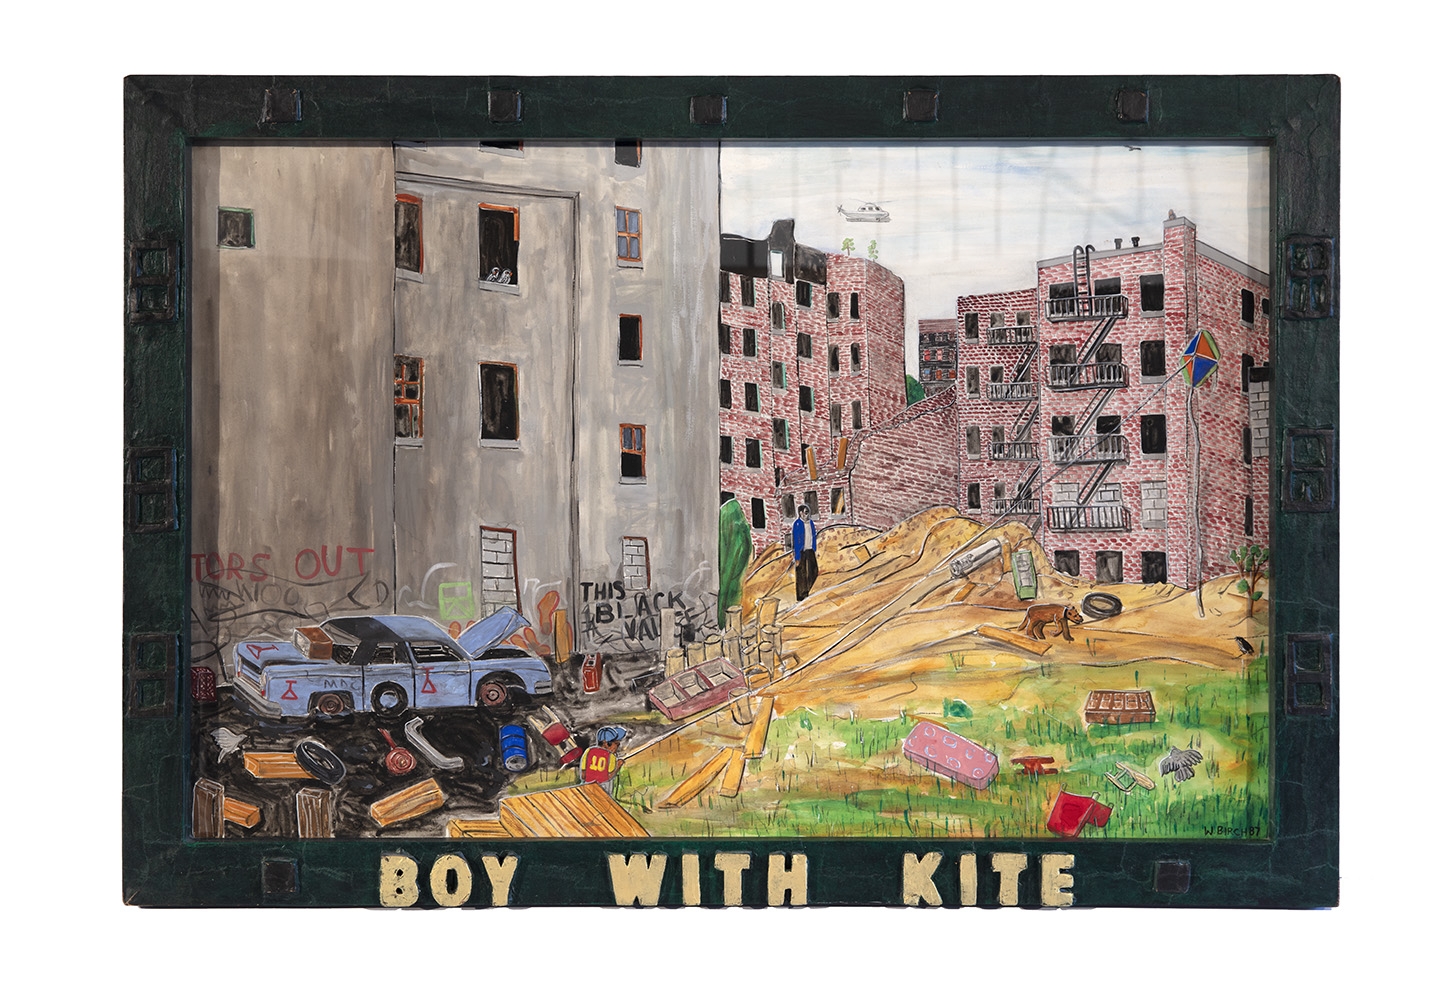 Boy with Kite, 1987
Pencil graphite and gouache on paper with acrylic painted papier-m&amp;acirc;ch&amp;eacute; frame
30.25 x 44.25 x 1.5 inches